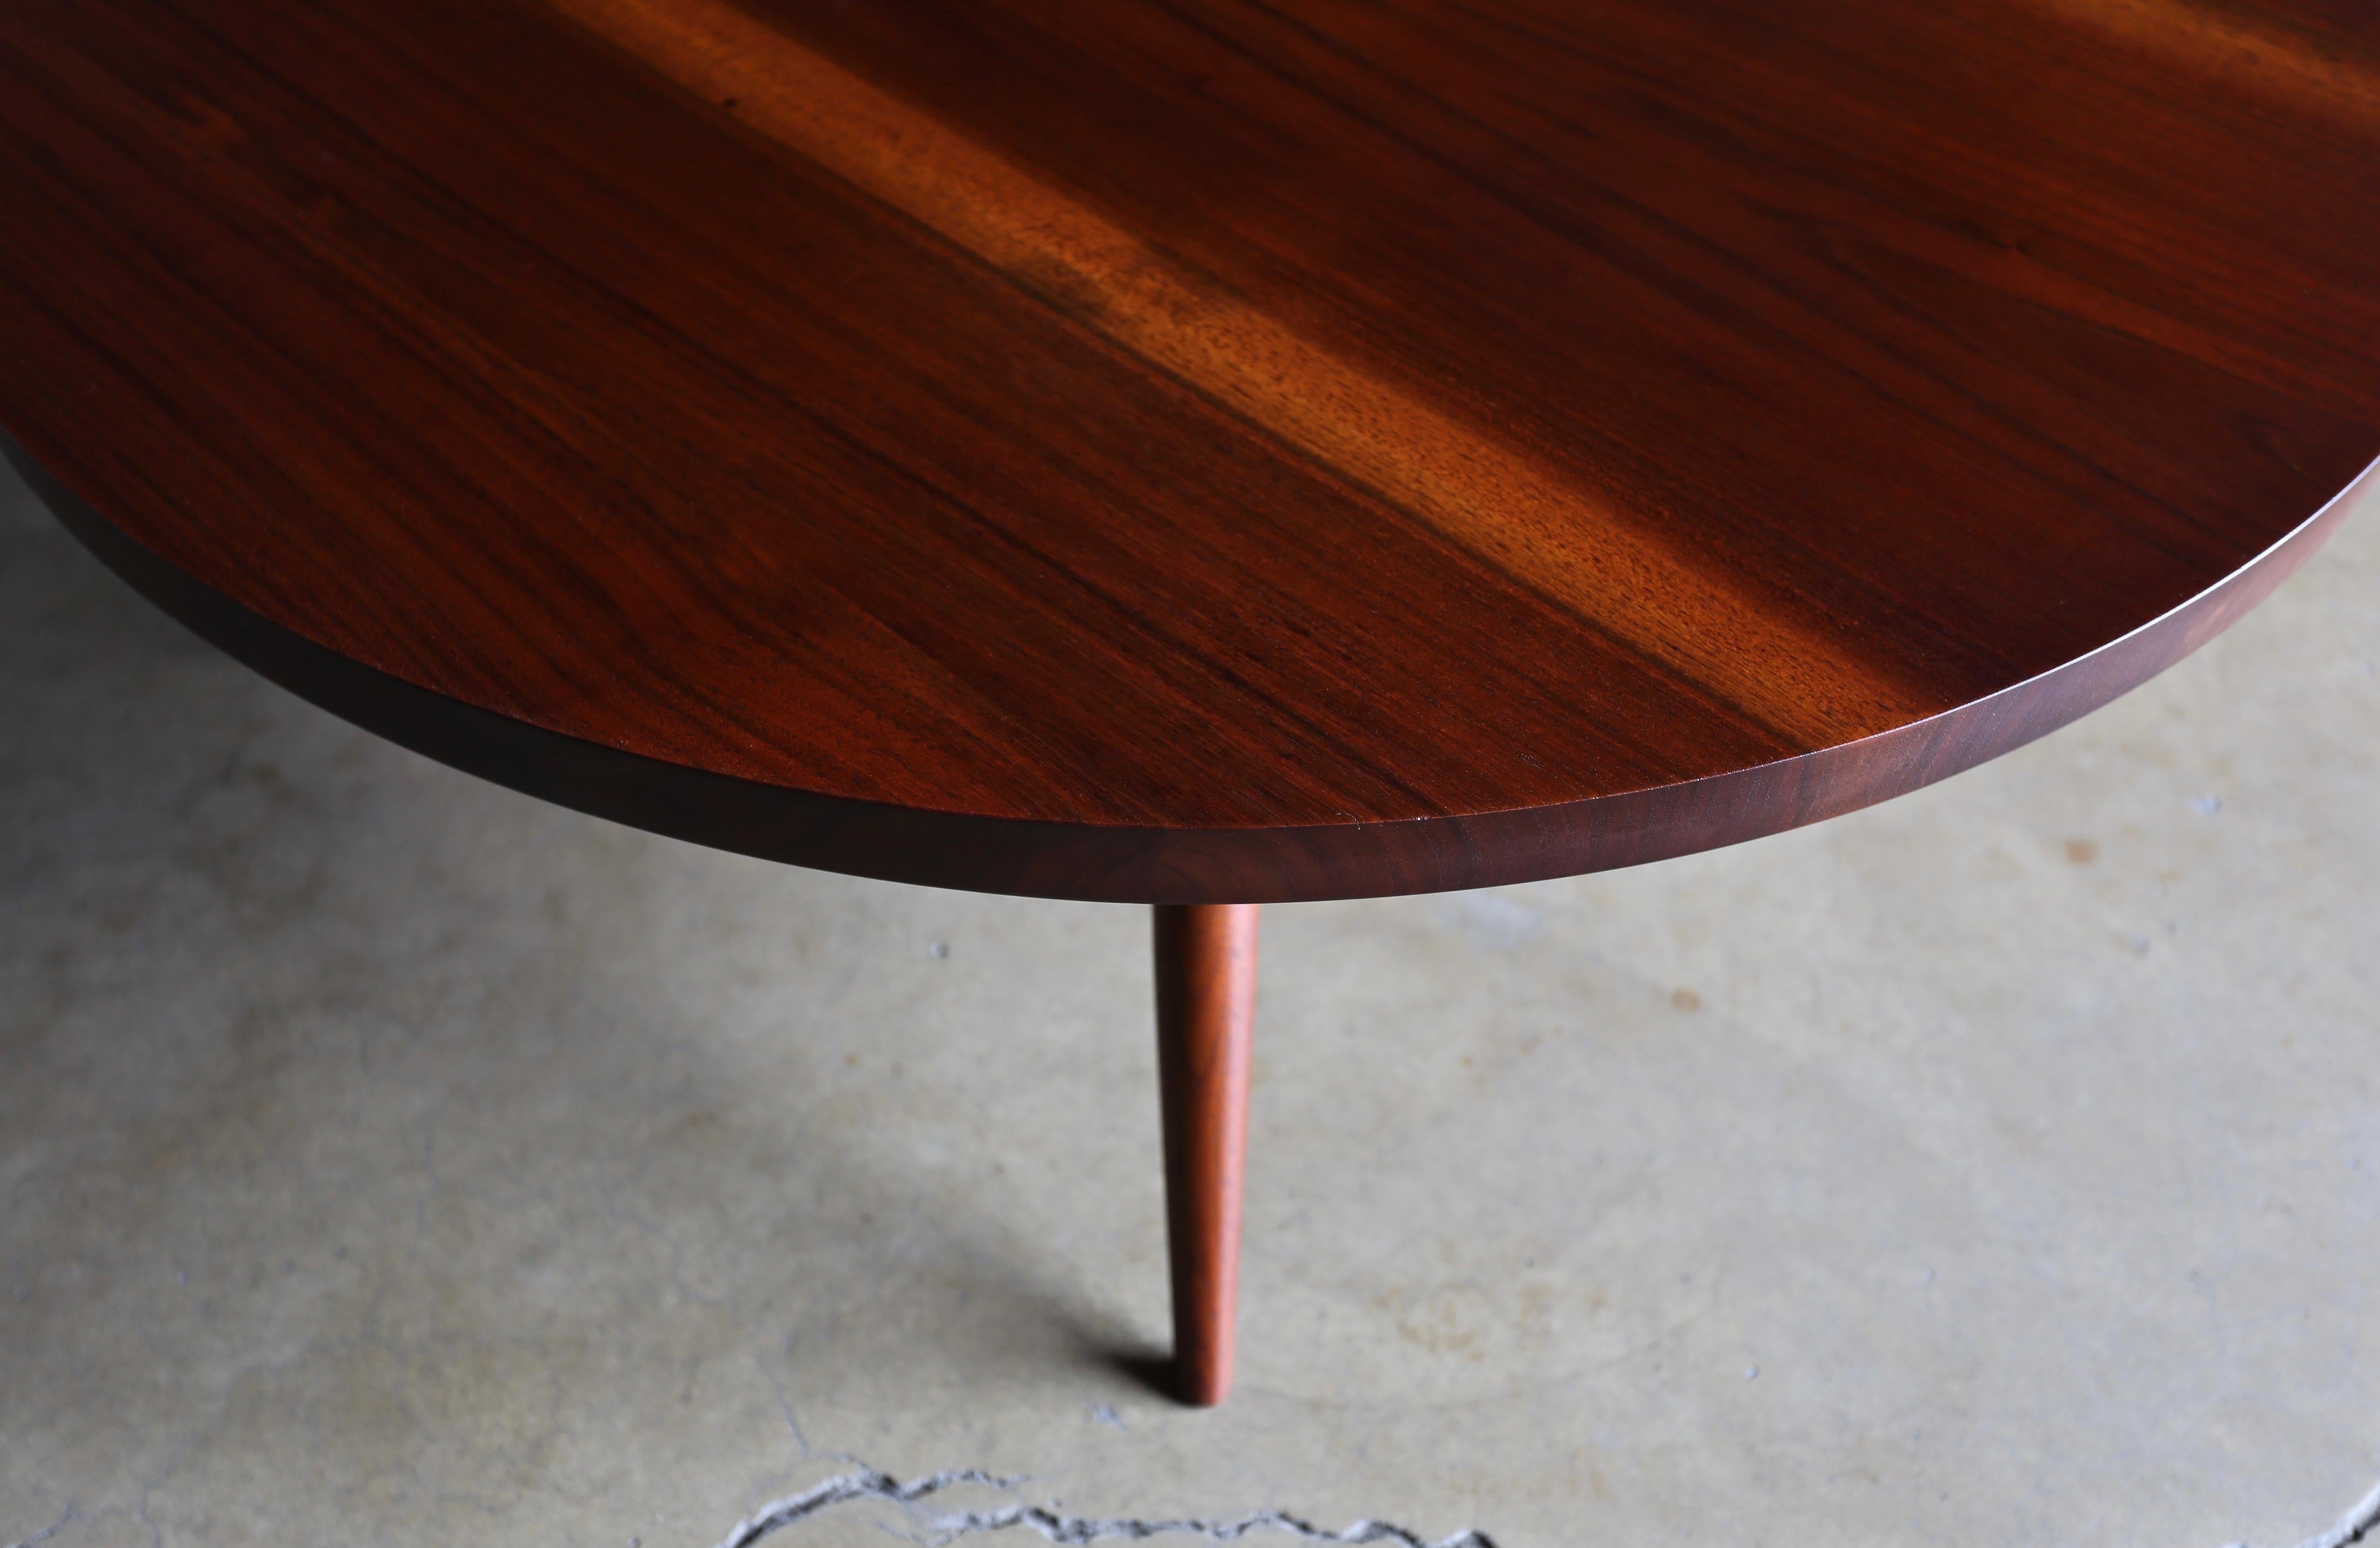 George Nakashima handcrafted round walnut coffee table 1959. 

The table will be accompanied by copies of the original order card and receipt dating to March 4, 1959 from the Nakashima Studio.